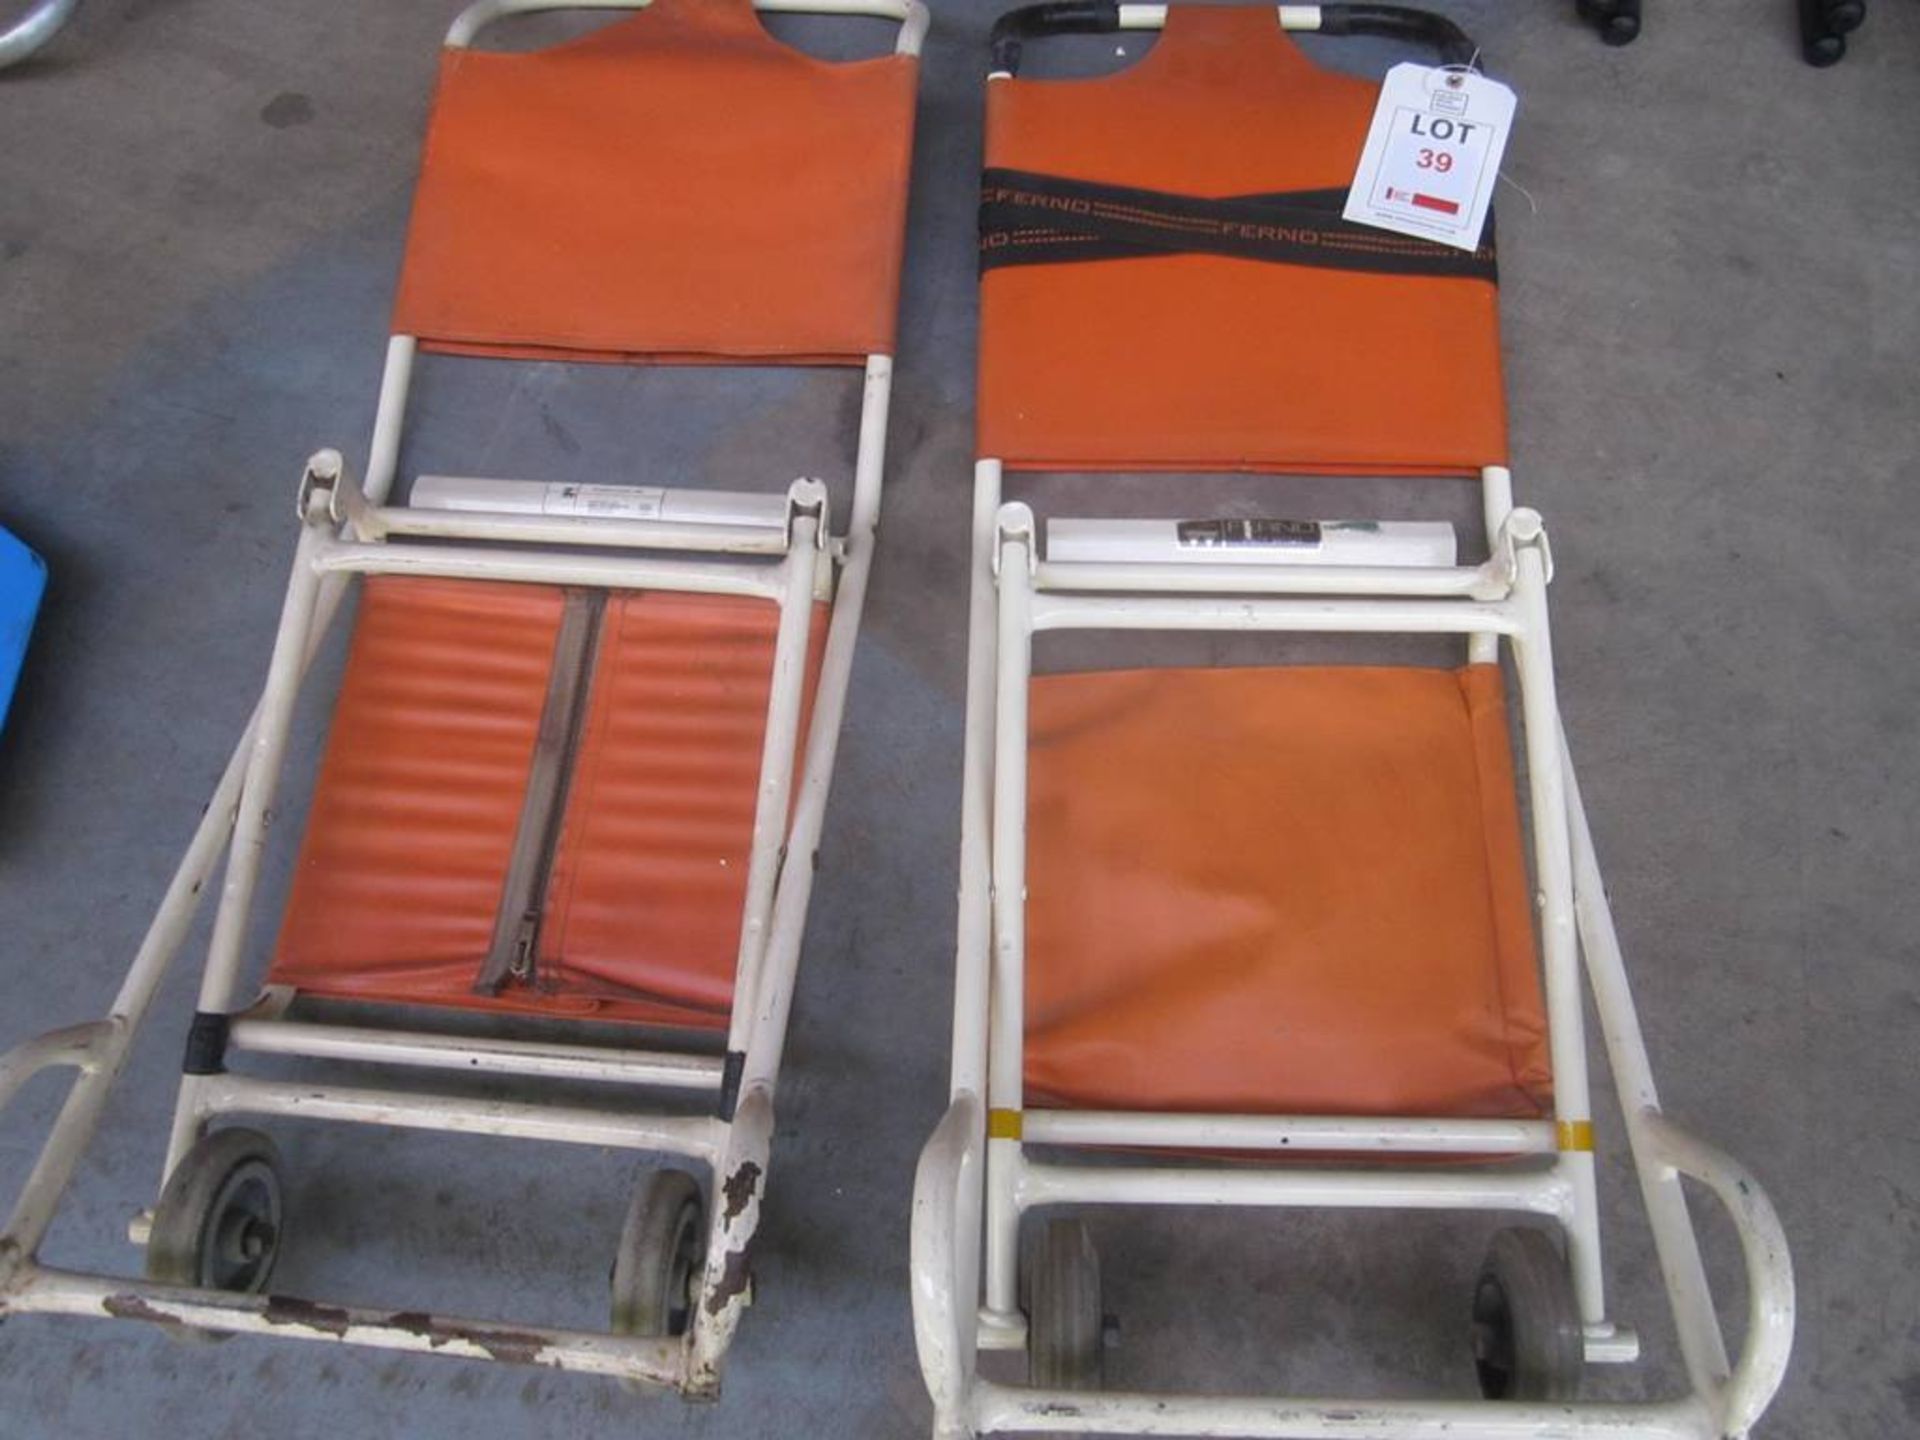 Two Ferno evacuation mobile chairs